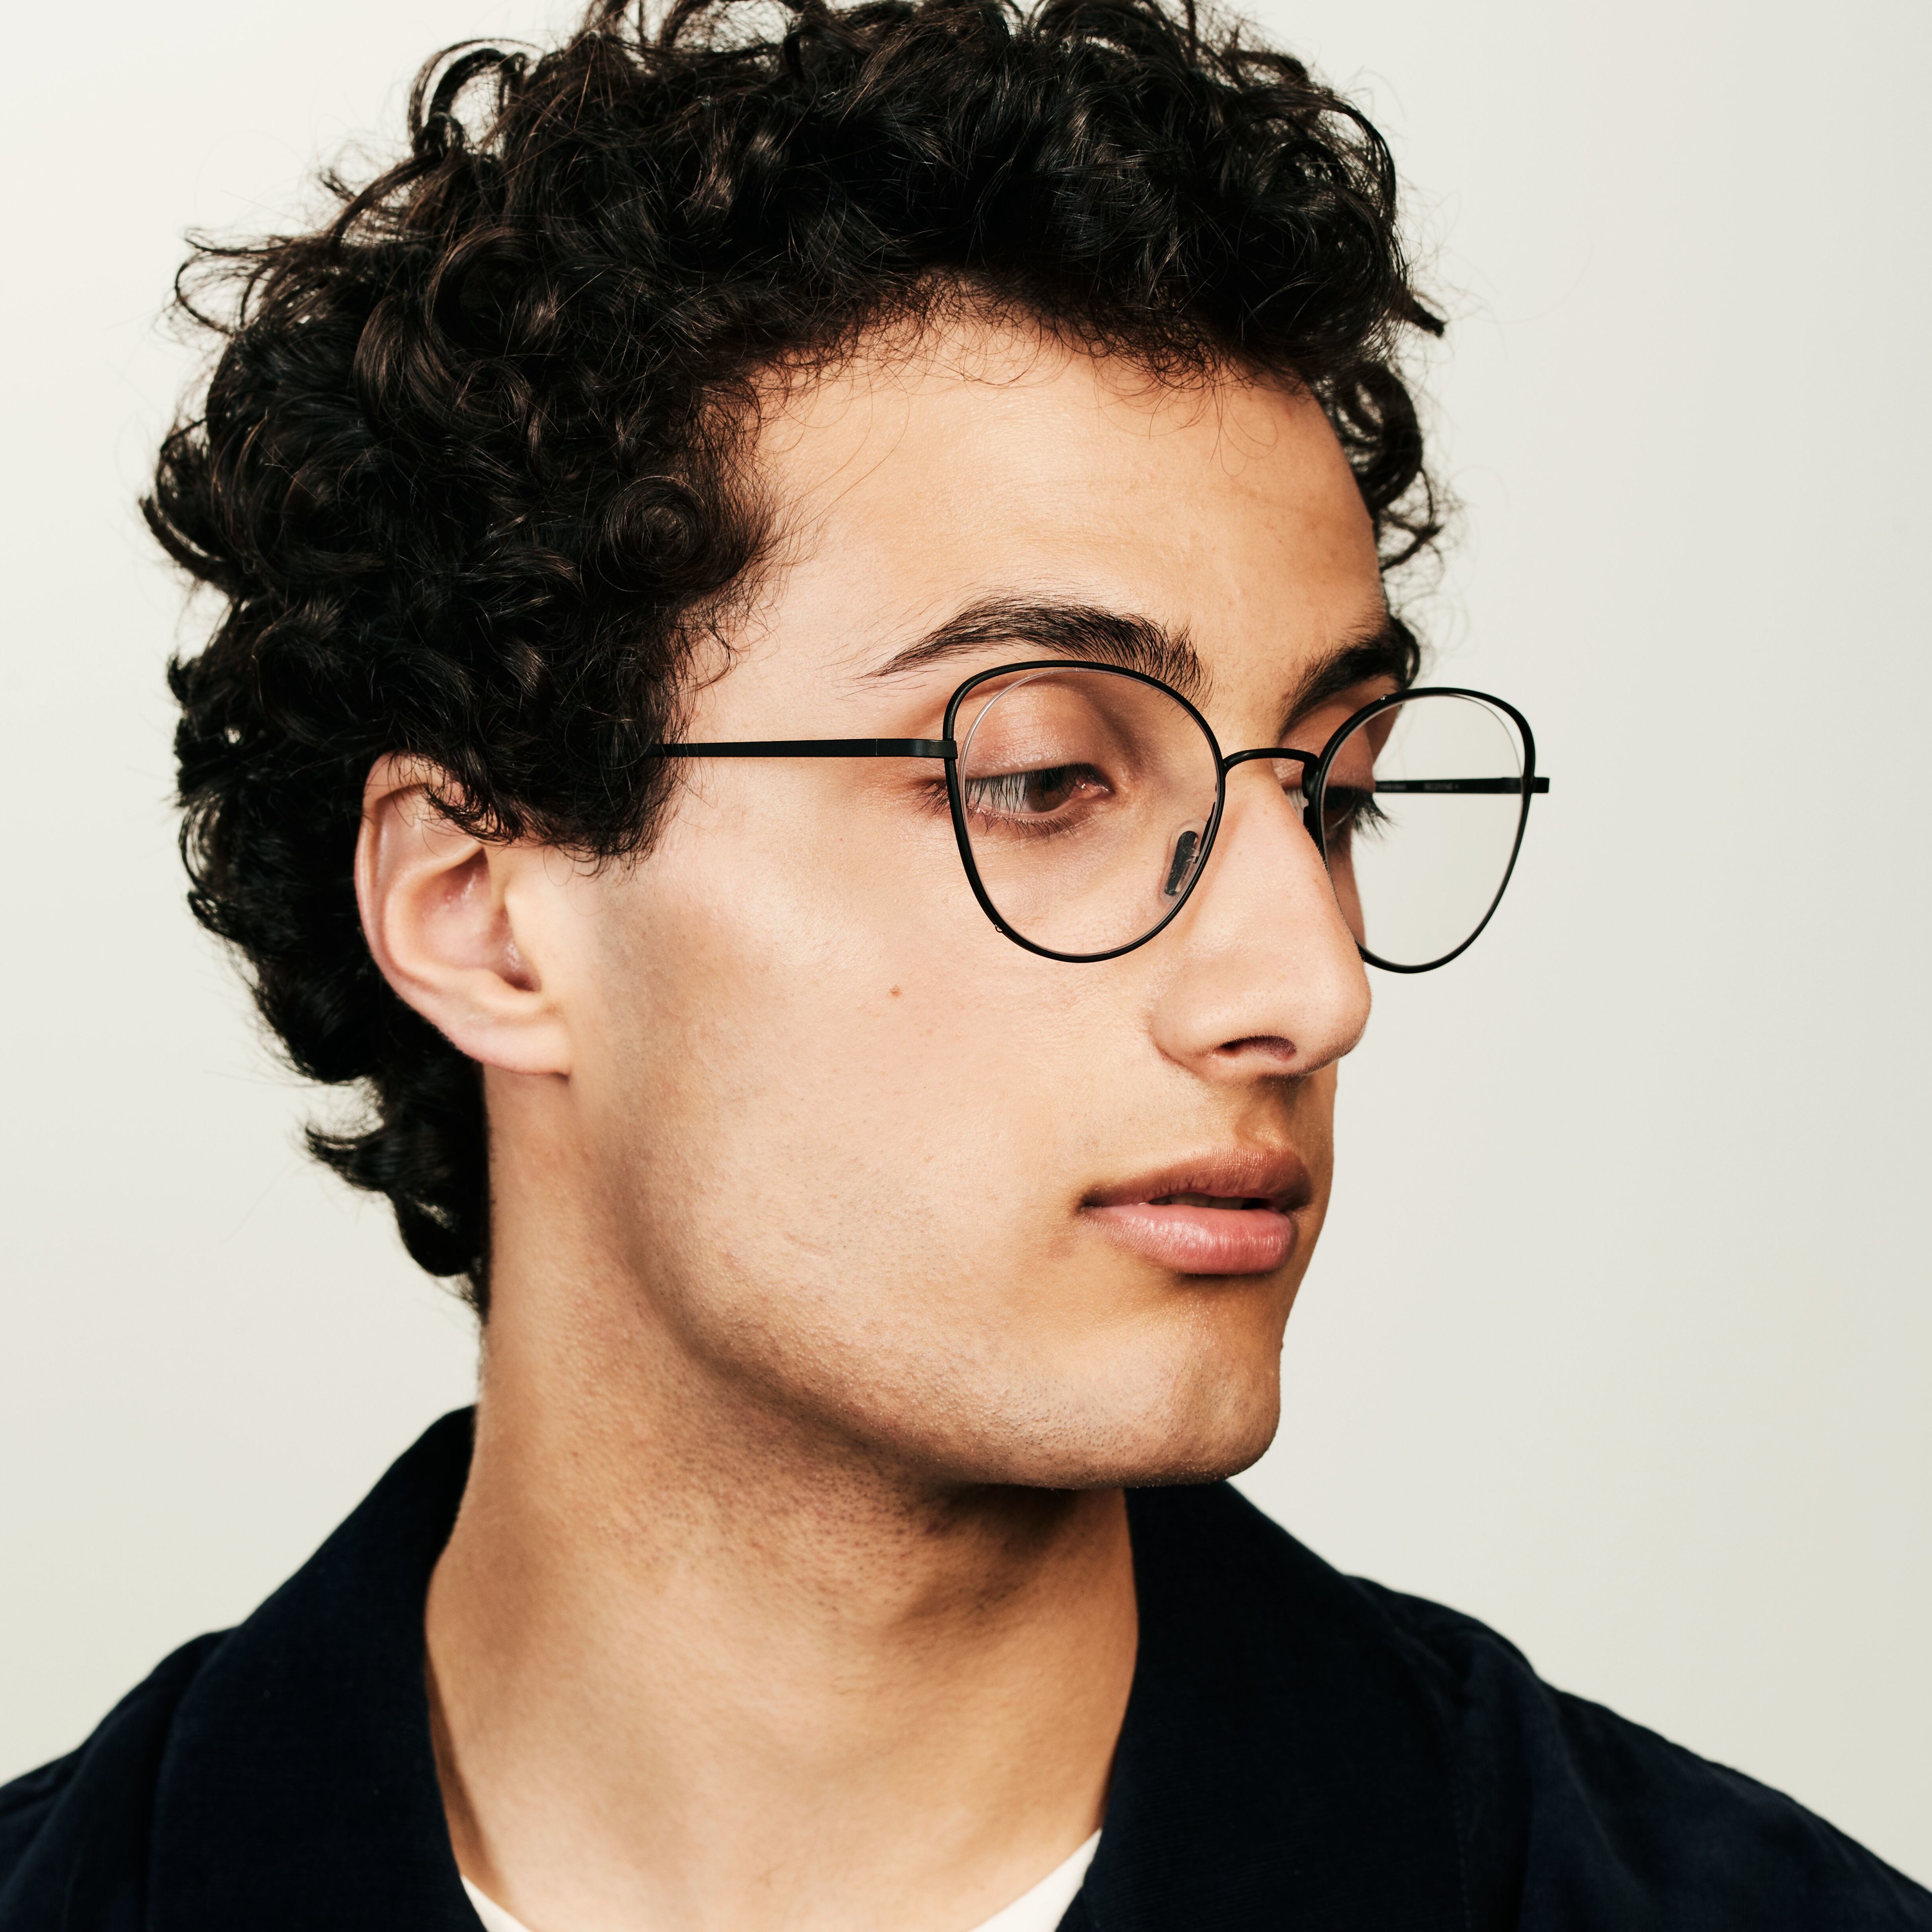 Ace & Tate Glasses | round metal in Black